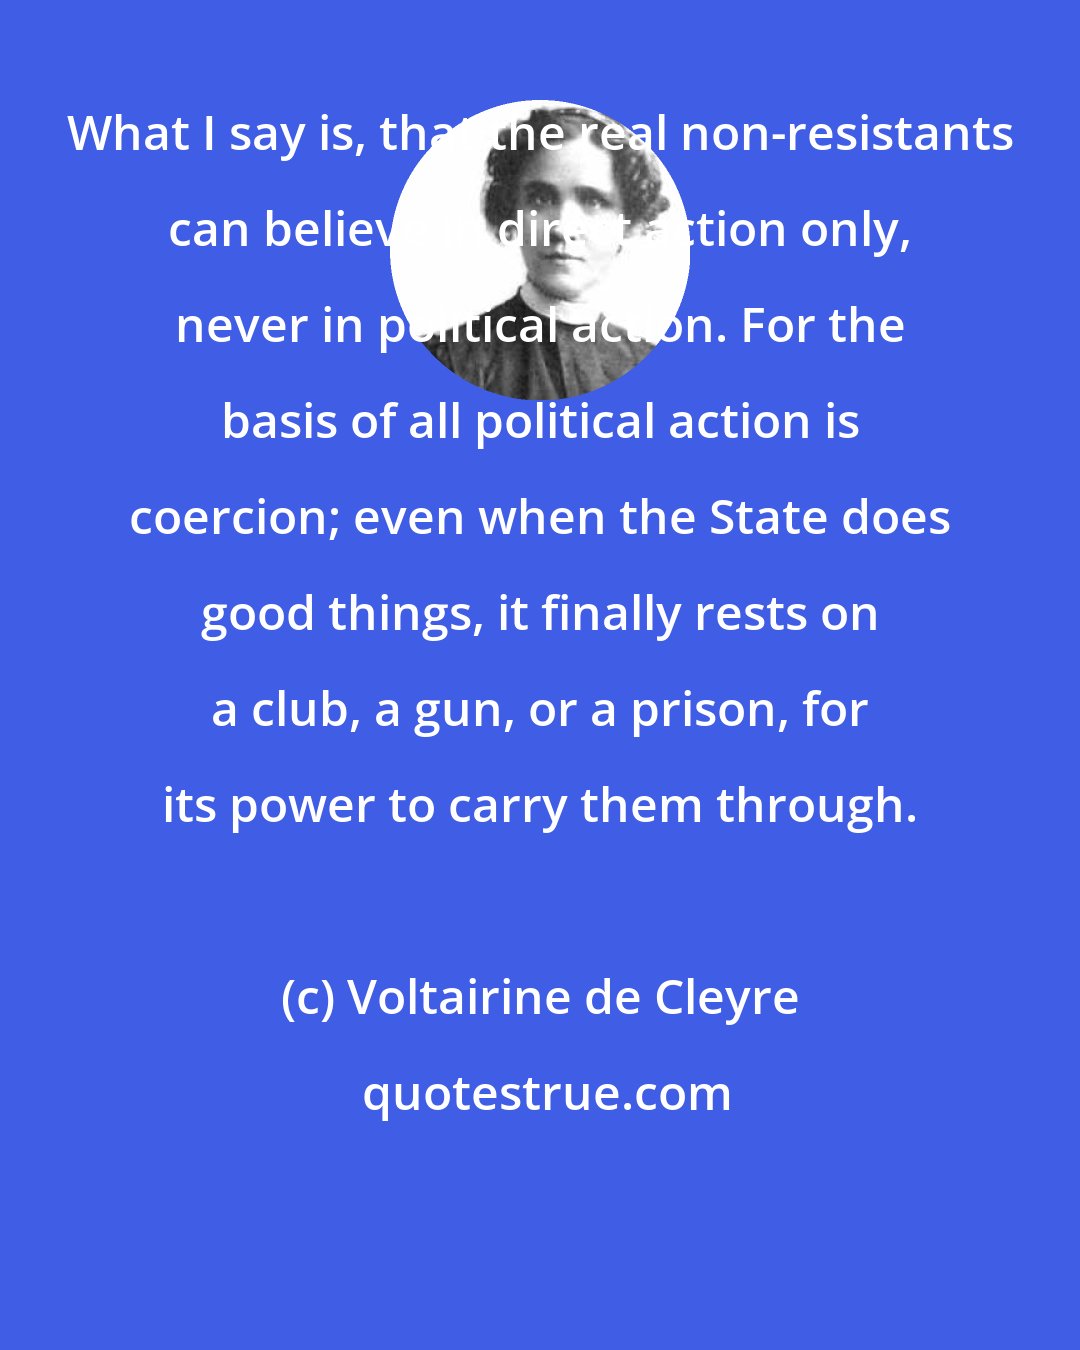 Voltairine de Cleyre: What I say is, that the real non-resistants can believe in direct action only, never in political action. For the basis of all political action is coercion; even when the State does good things, it finally rests on a club, a gun, or a prison, for its power to carry them through.